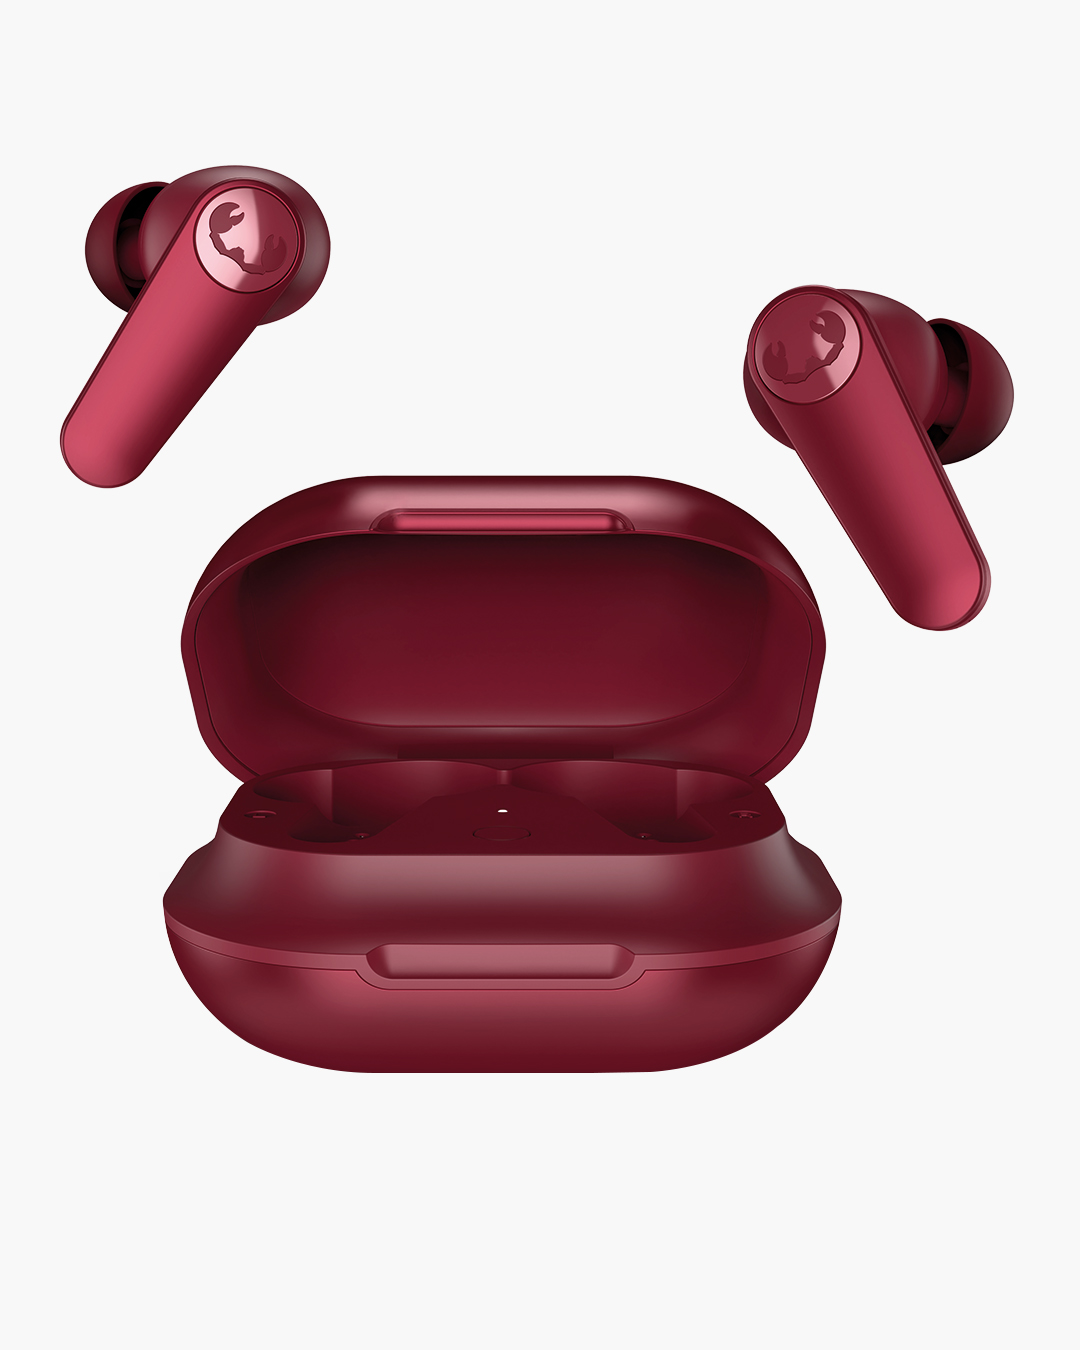 Fresh 'n Rebel - Twins ANC - True Wireless In-ear headphones with active noise cancelling - Ruby Red